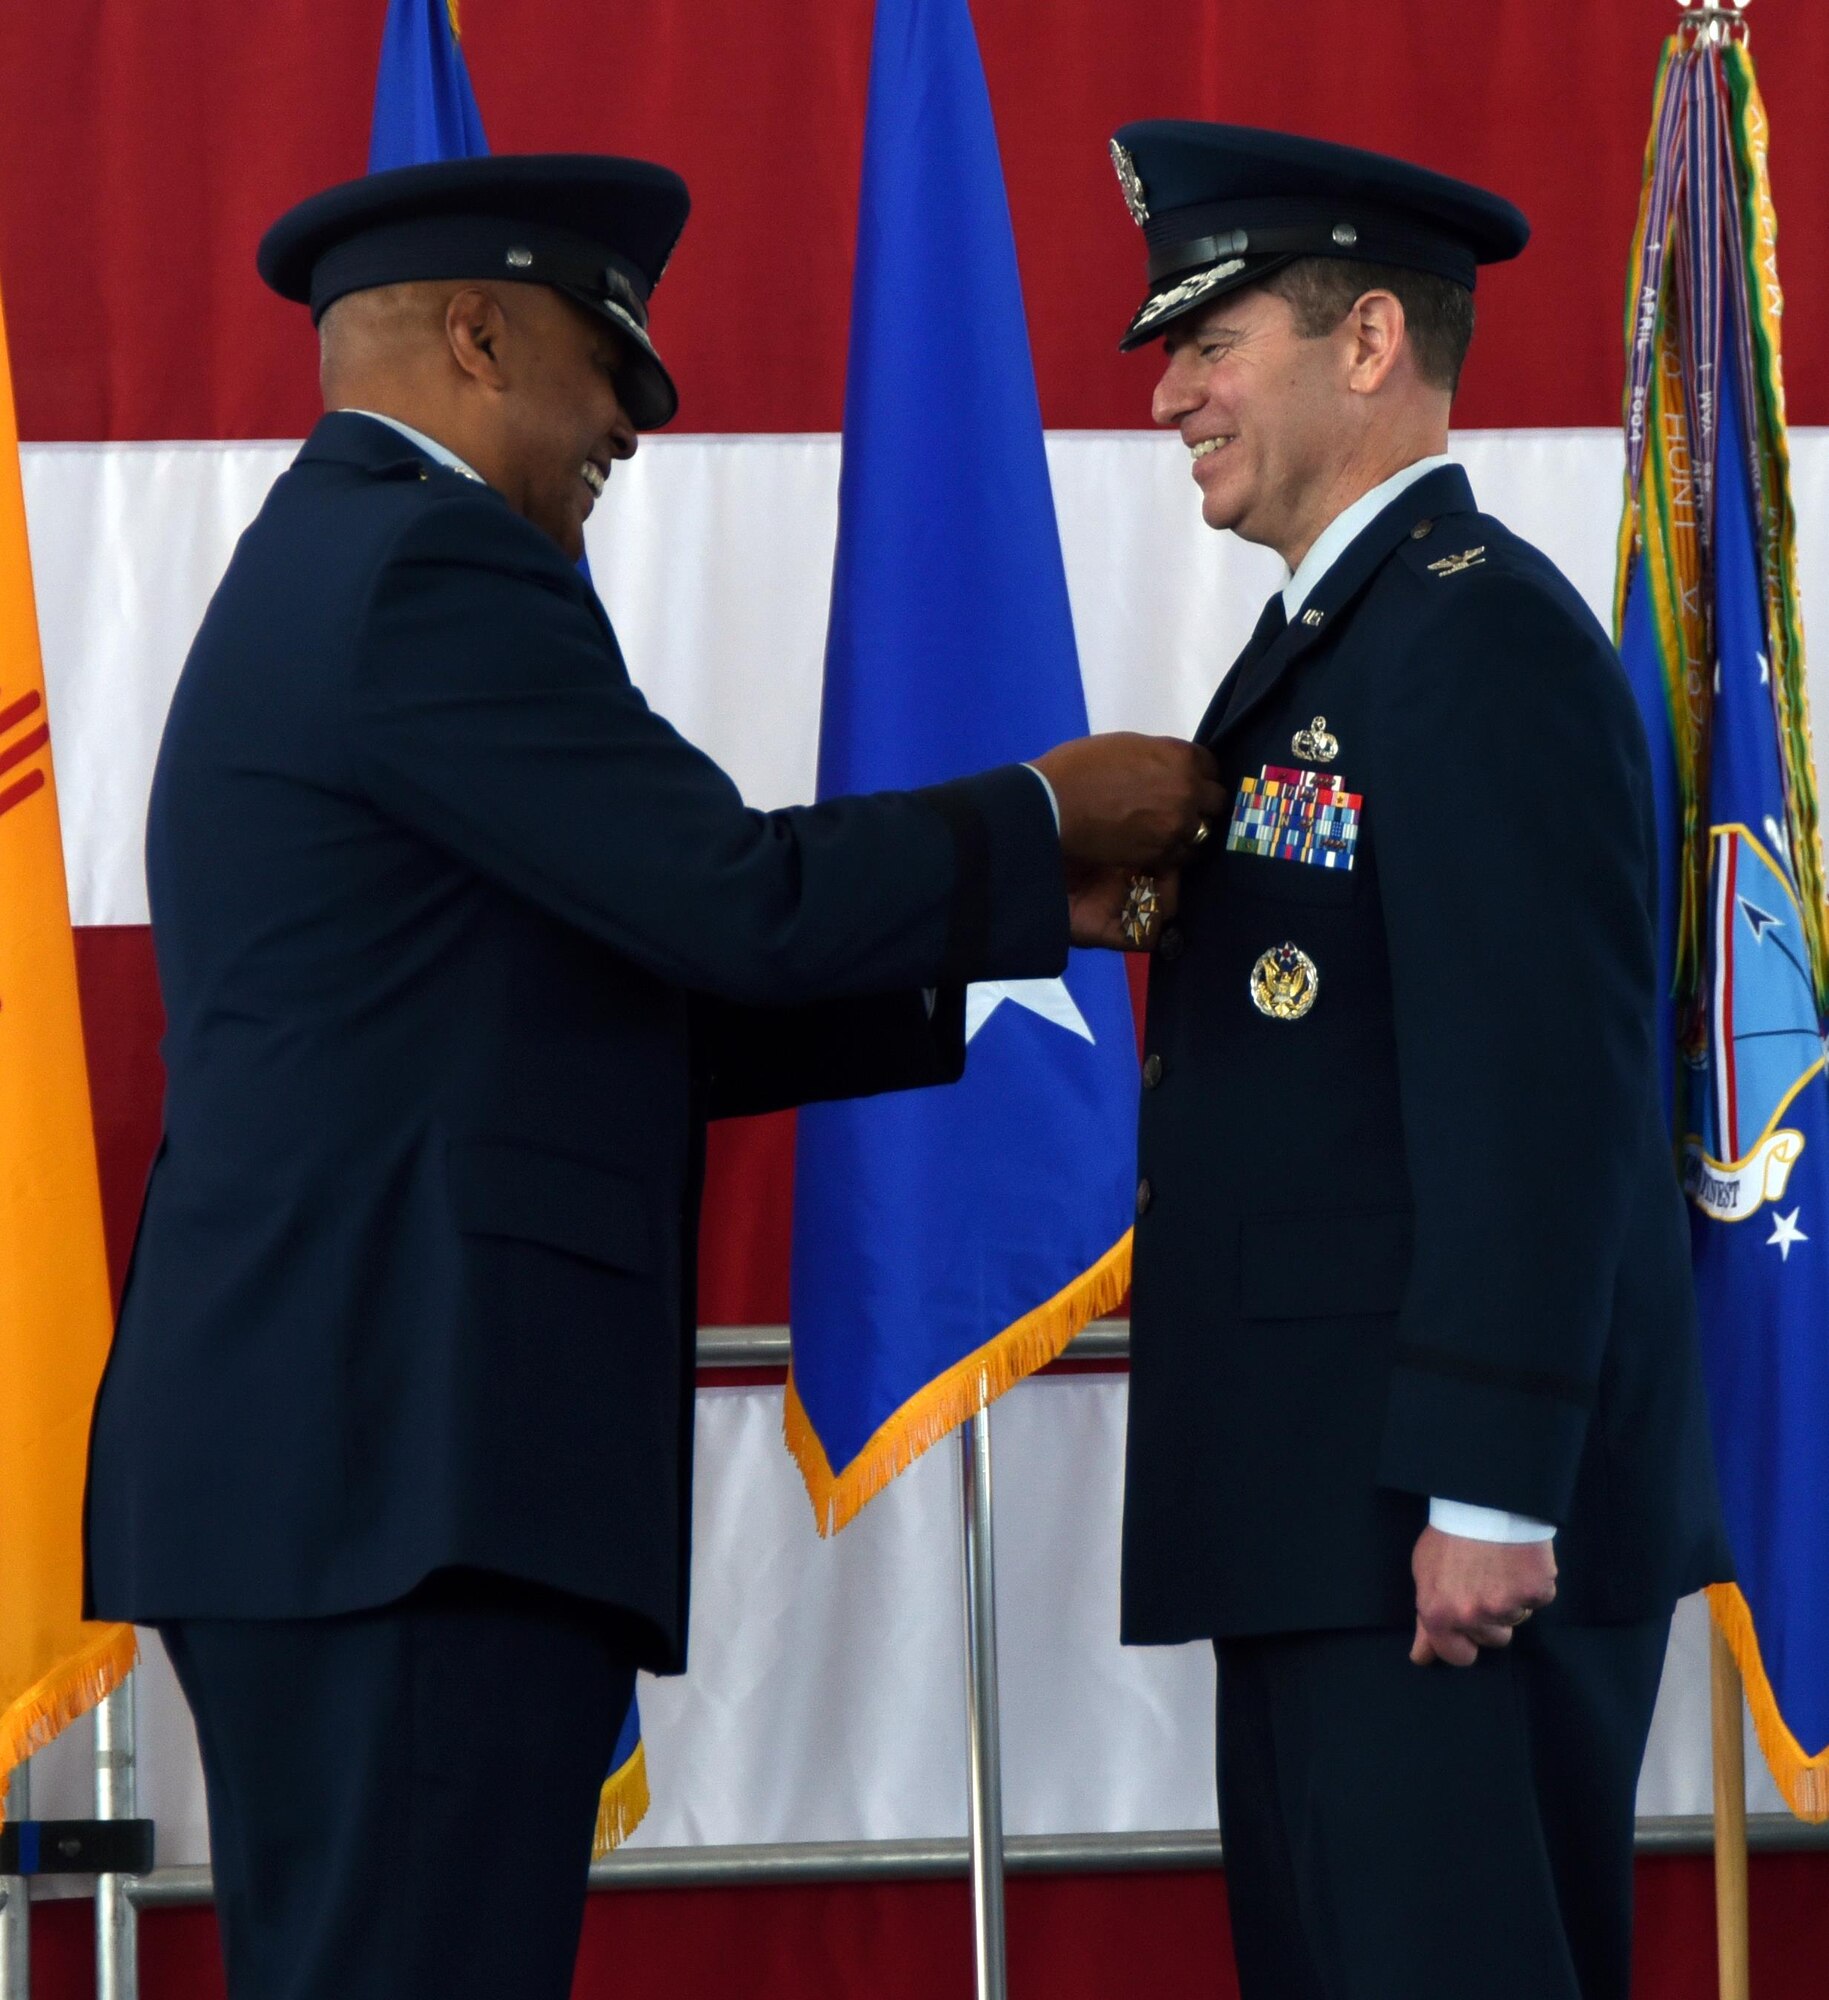 Maj. Gen. Anthony Cotton, 20th Air Force commander, pins the Legion of Merit on Col Eric H. Froehlich during a change of command ceremony at Kirtland Air Force Base, New Mexico, June 16. Froehlich commanded the wing during its first unit effectiveness inspection, where the wing was rated excellent. (U.S. Air Force photo by Senior Airman Chandler Baker)